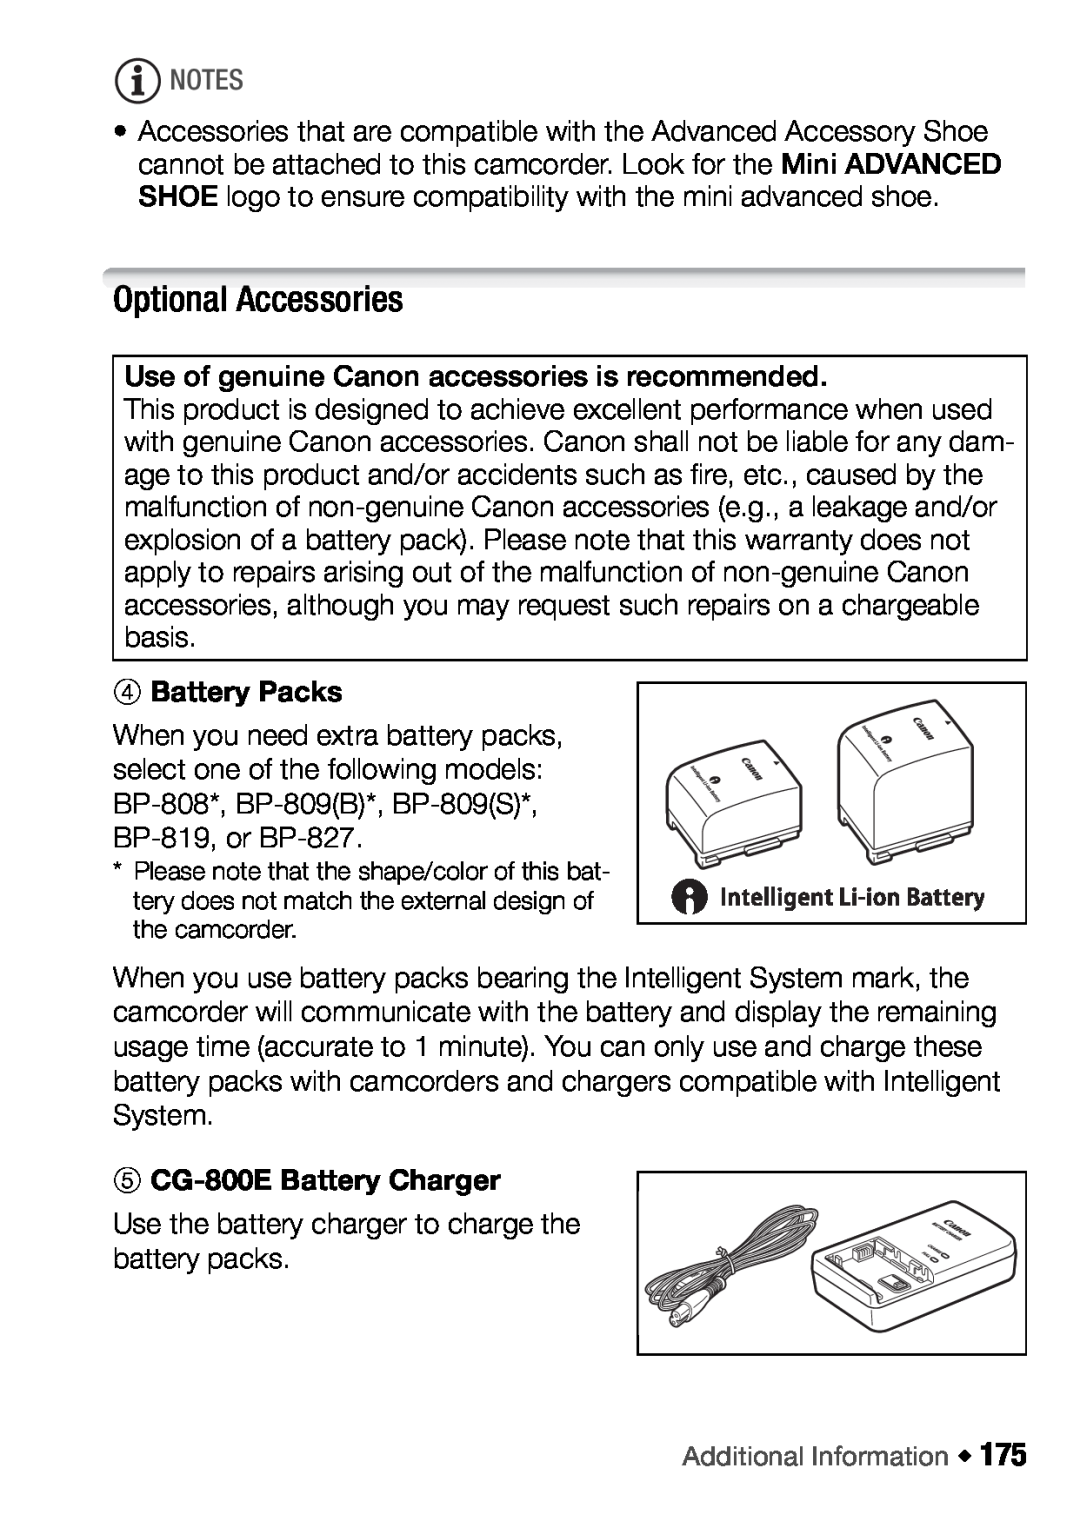 Canon HFM46, HFM406 instruction manual Optional Accessories, Battery Packs, 5 CG-800E Battery Charger 